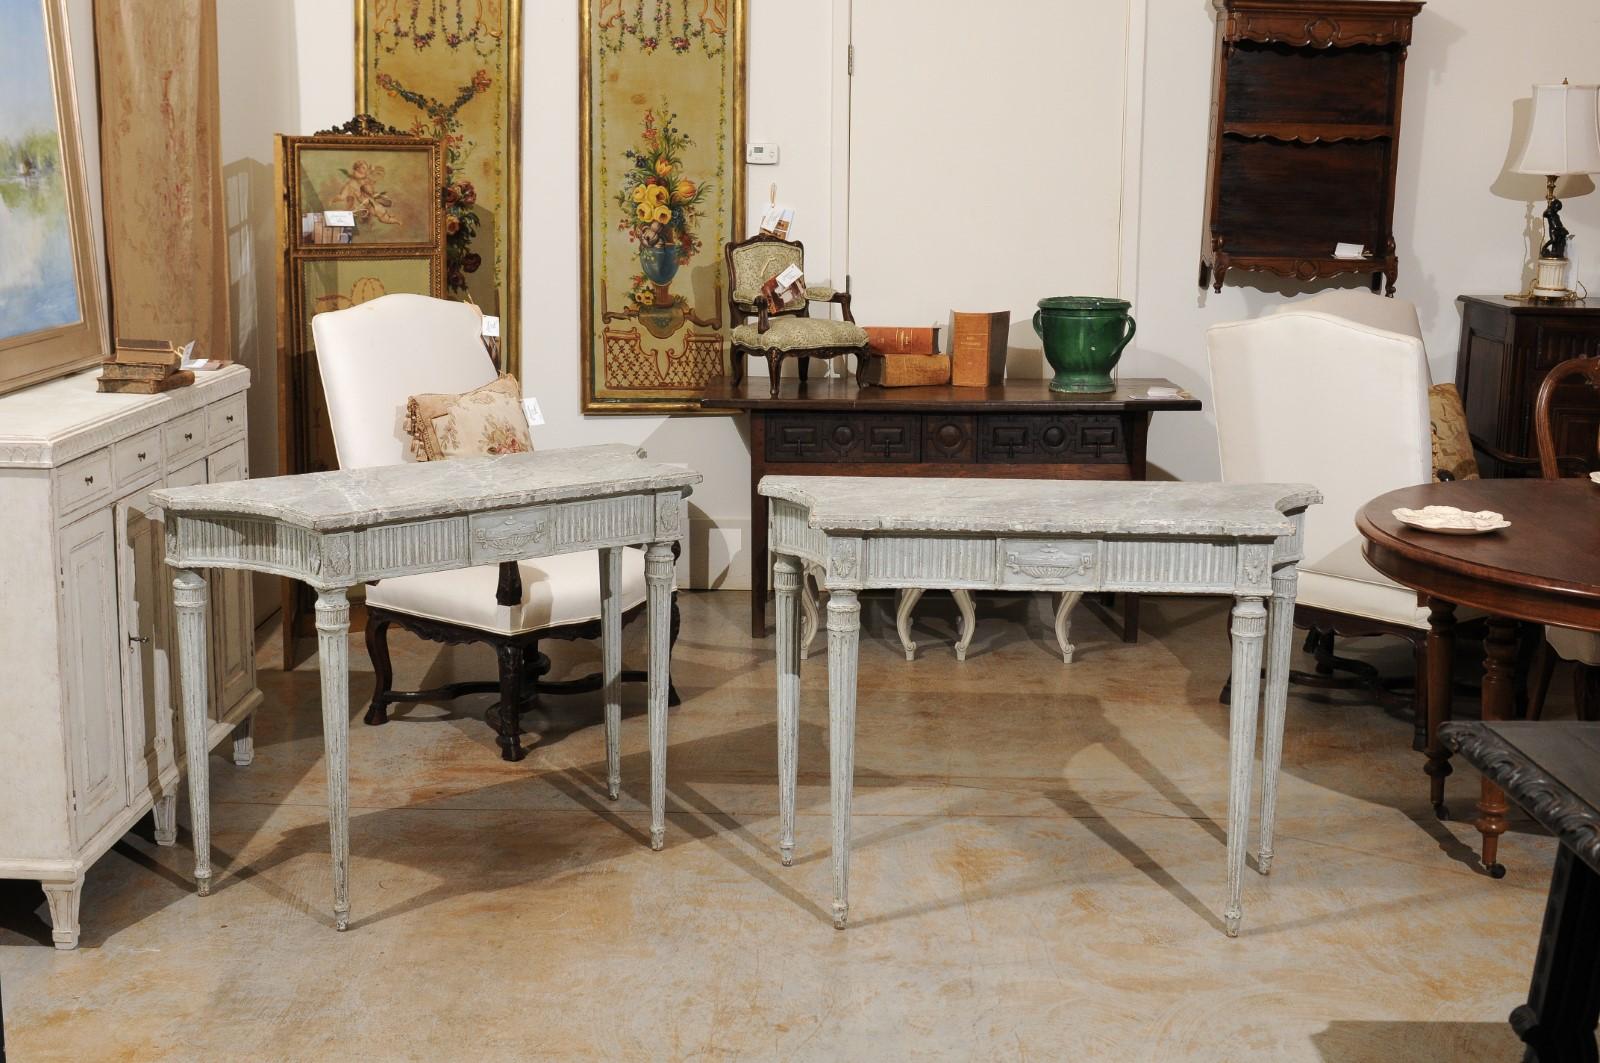 Two French Louis XVI style painted and console tables from the third quarter of the 19th century with curving faux-marble tops, reeded aprons, carved vases and fluted legs. The tables are priced and sold individually. Born under the reign of